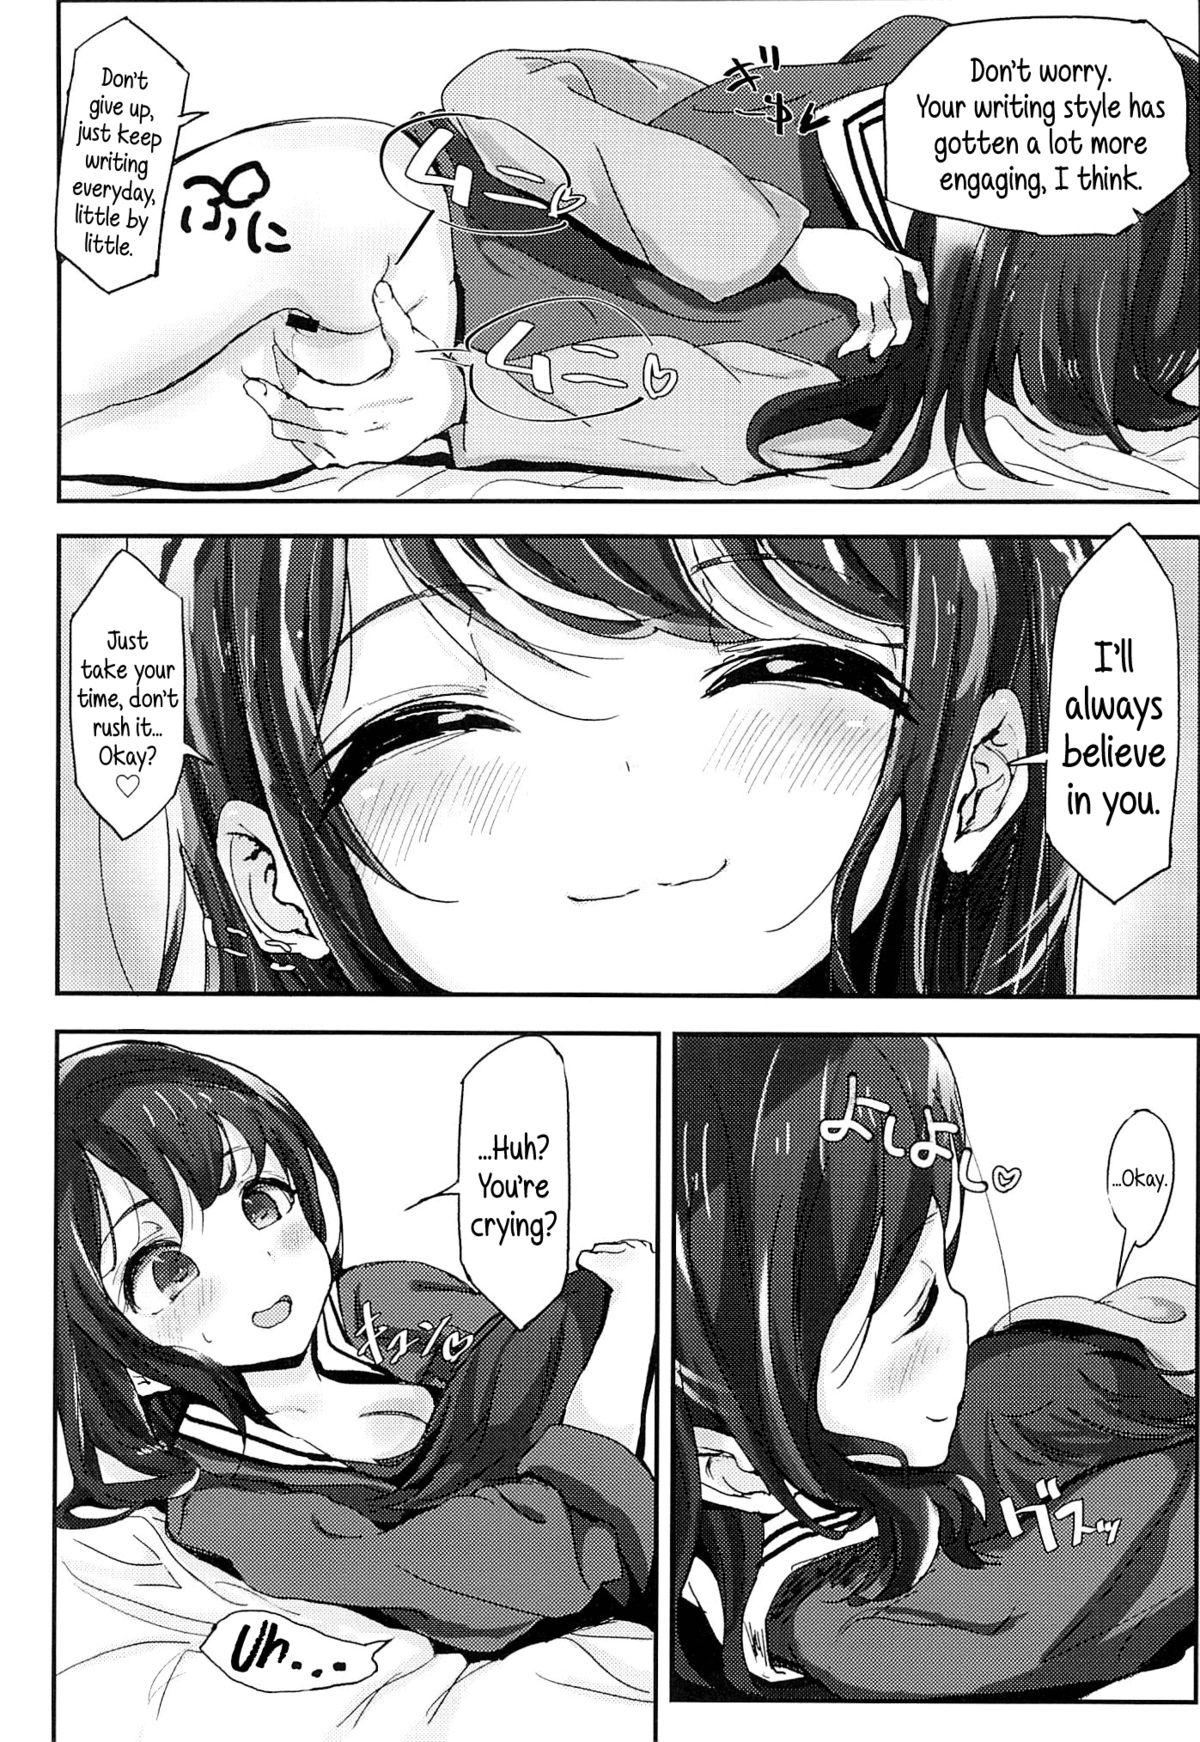 Canadian Shikyuukou no Kanata, Onii chan no Hate | Beyond the mouth of the uterus lies Onii-chan’s demise Facebook - Page 11